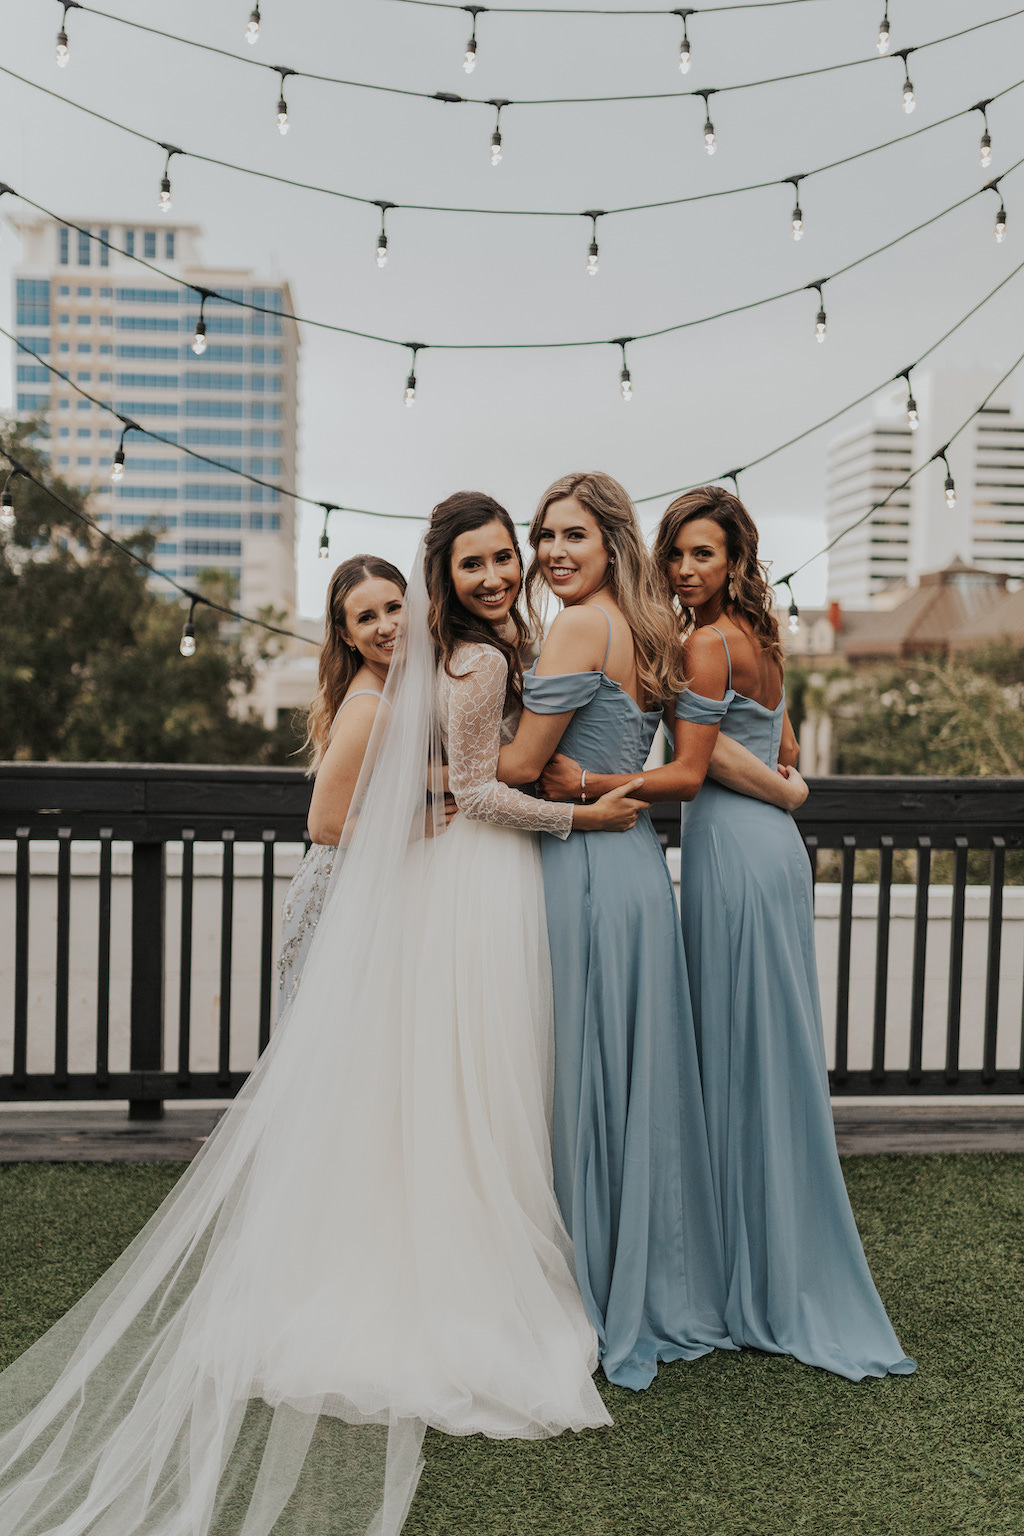 Bride and Bridesmaids in Dusty Blue Off the Shoulder Matching Bridesmaids Dresses | St. Pete Rooftop Wedding Venue Station House